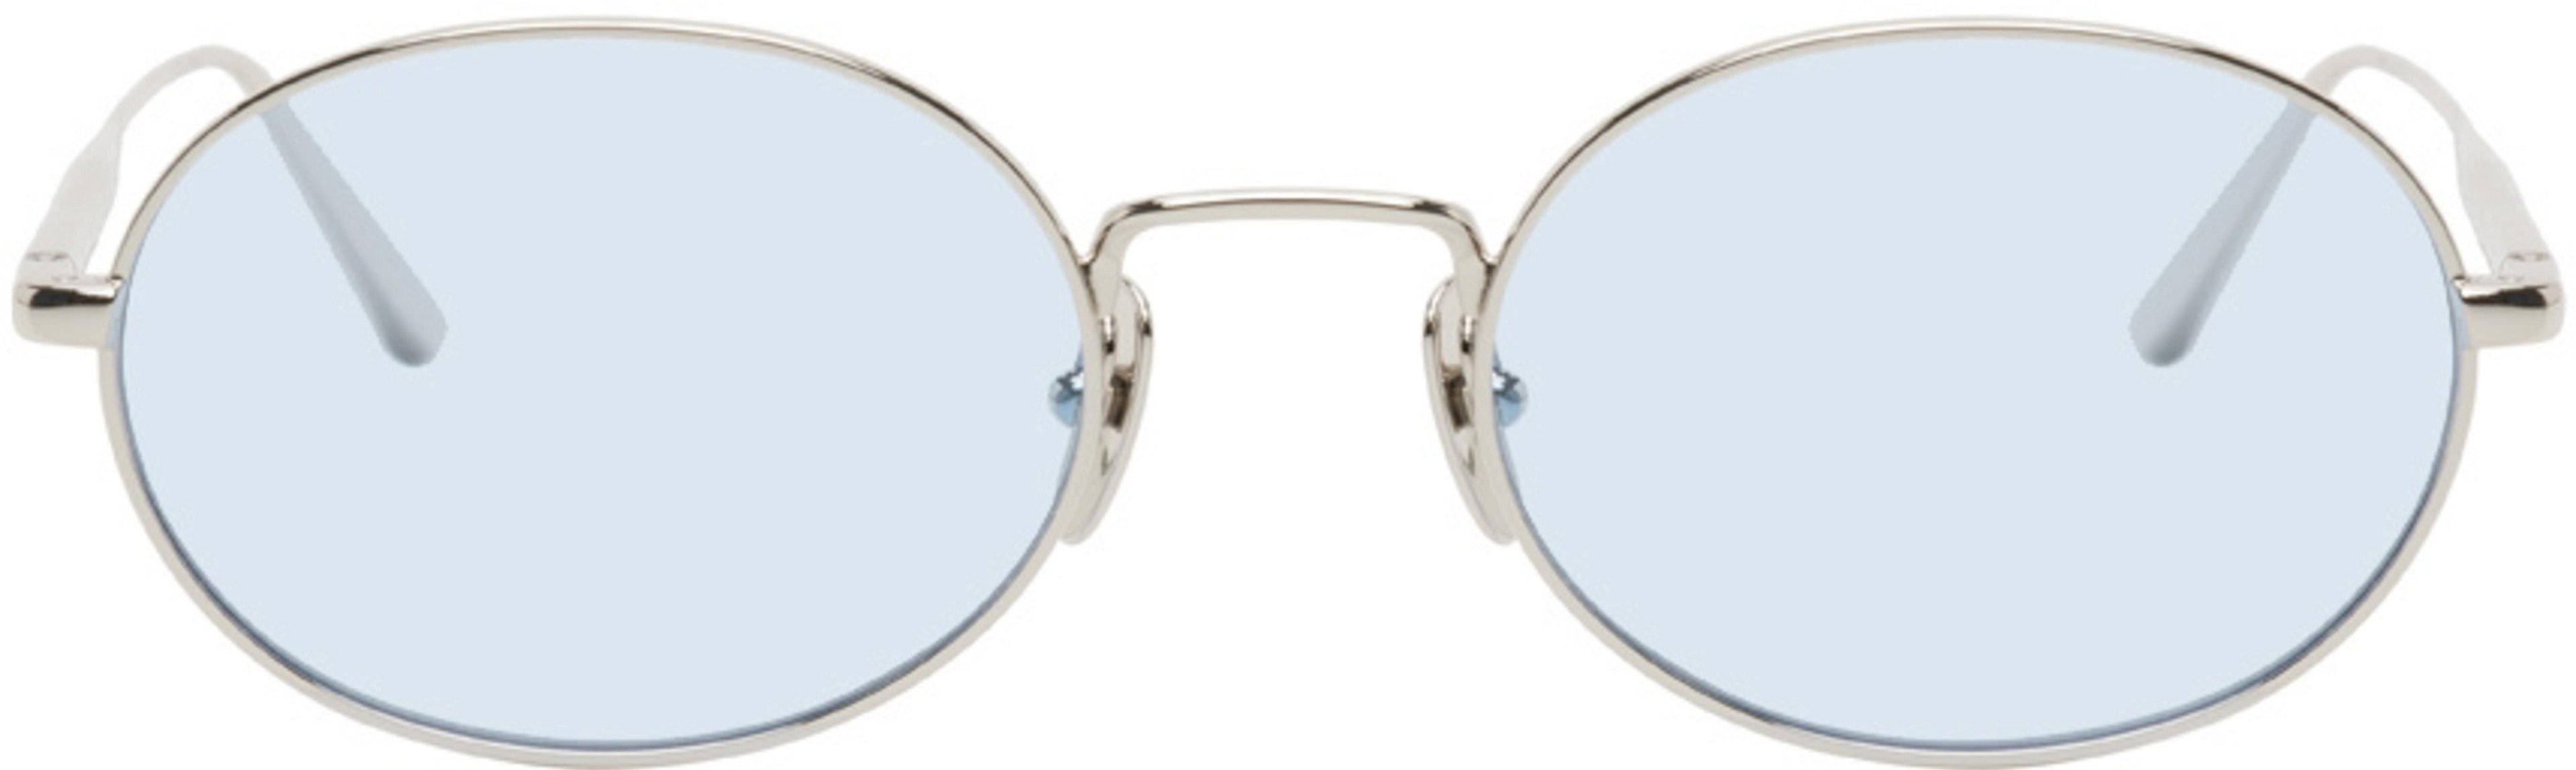 Silver Oval Sunglasses by CHIMI